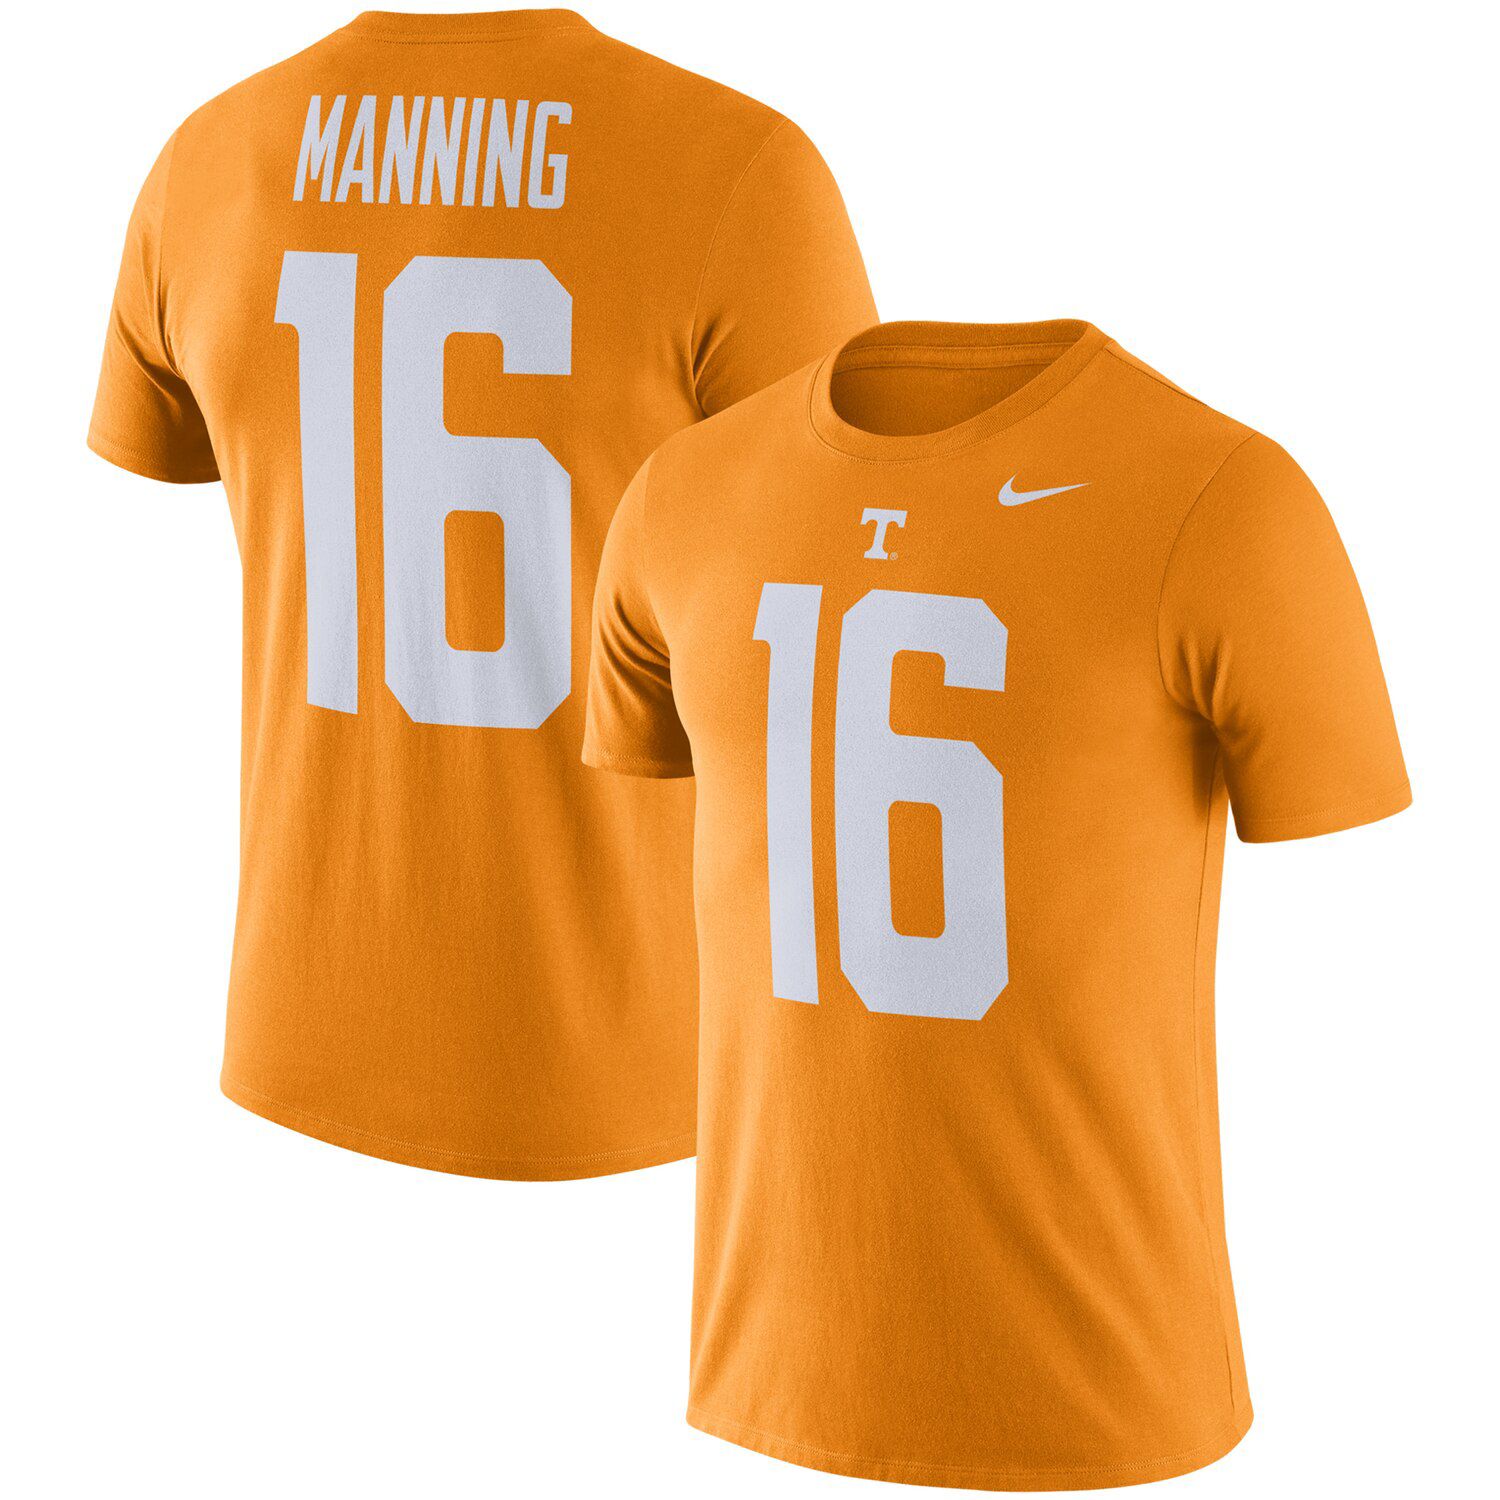 peyton manning tennessee jersey for sale